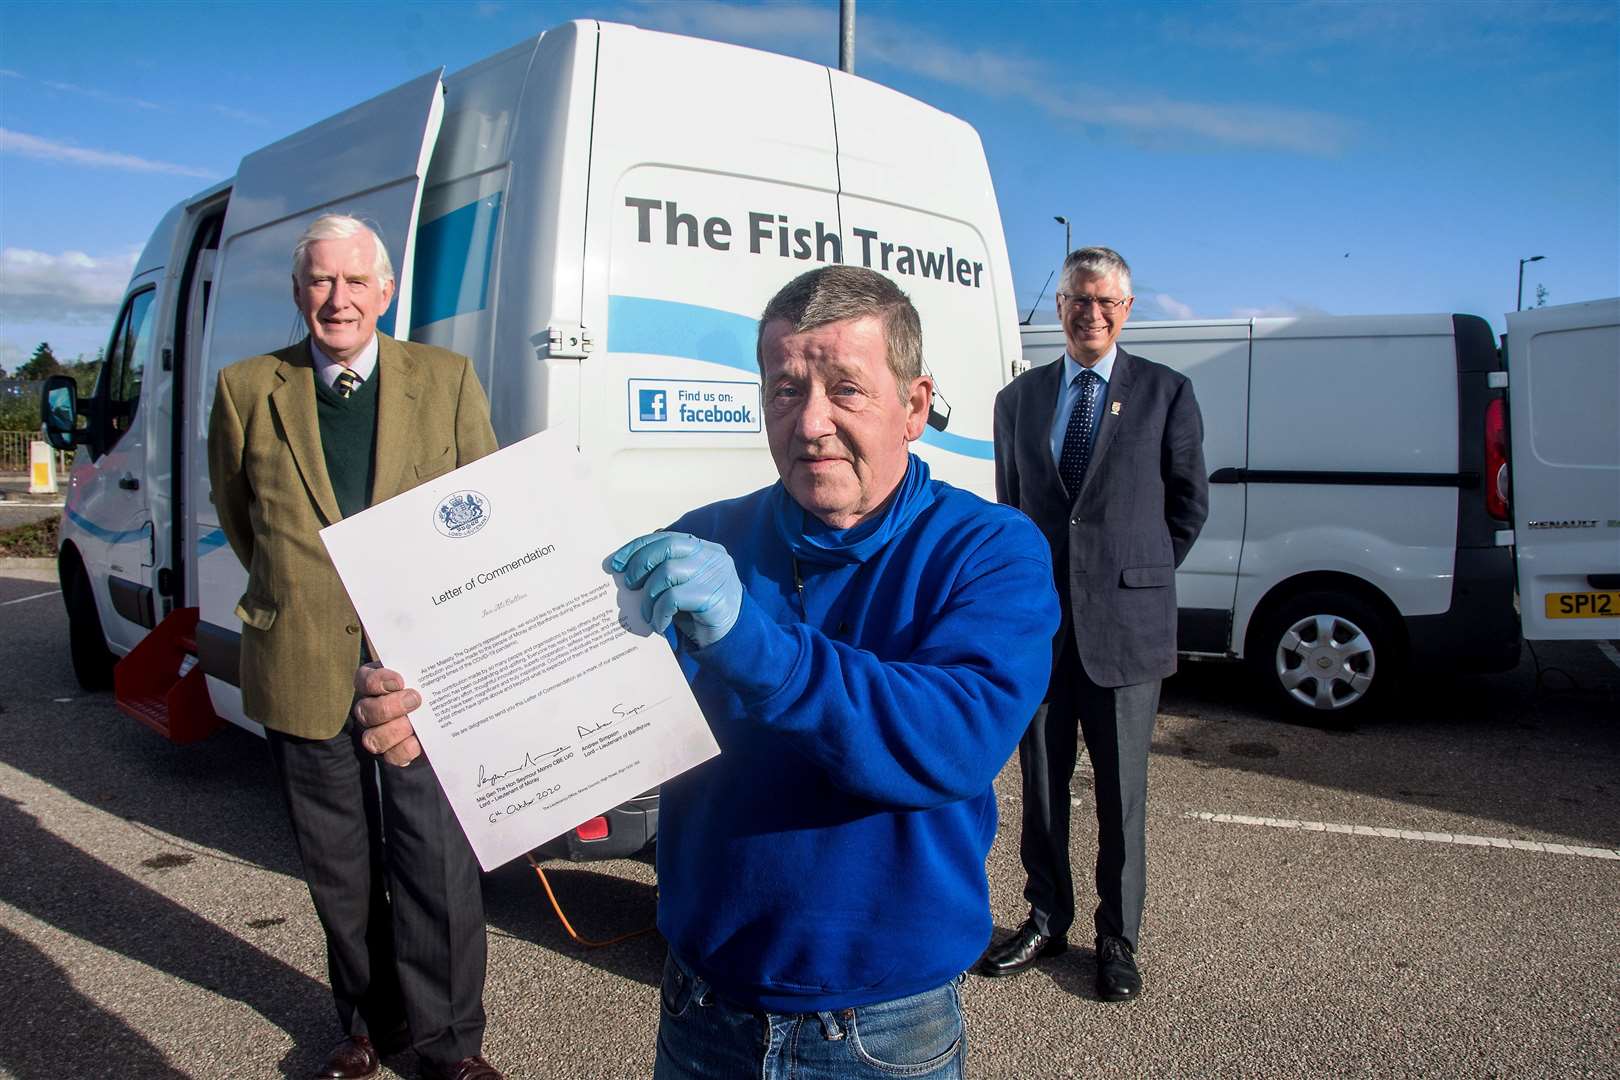 Buckie man Ian McCallion proudly shows off his commendation, joined by Seymour Monro (back left) and Andrew Simpson, the Lord-Lieutenants of Moray and Banffshire respectively. Picture: Becky Saunderson